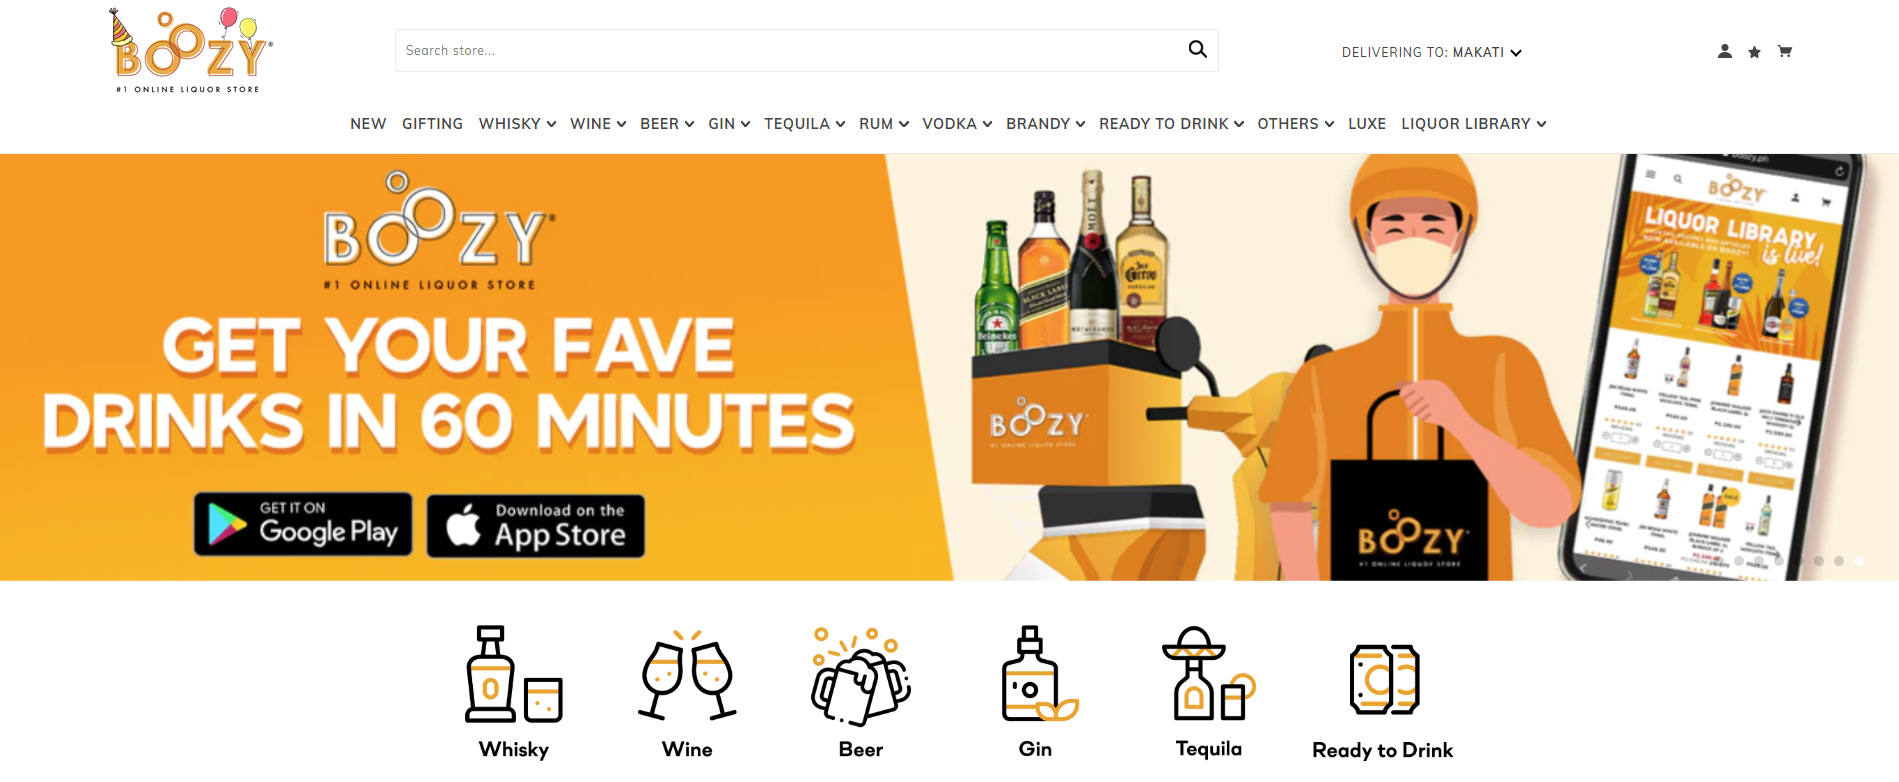 best online grocery delivery philippines - Boozy